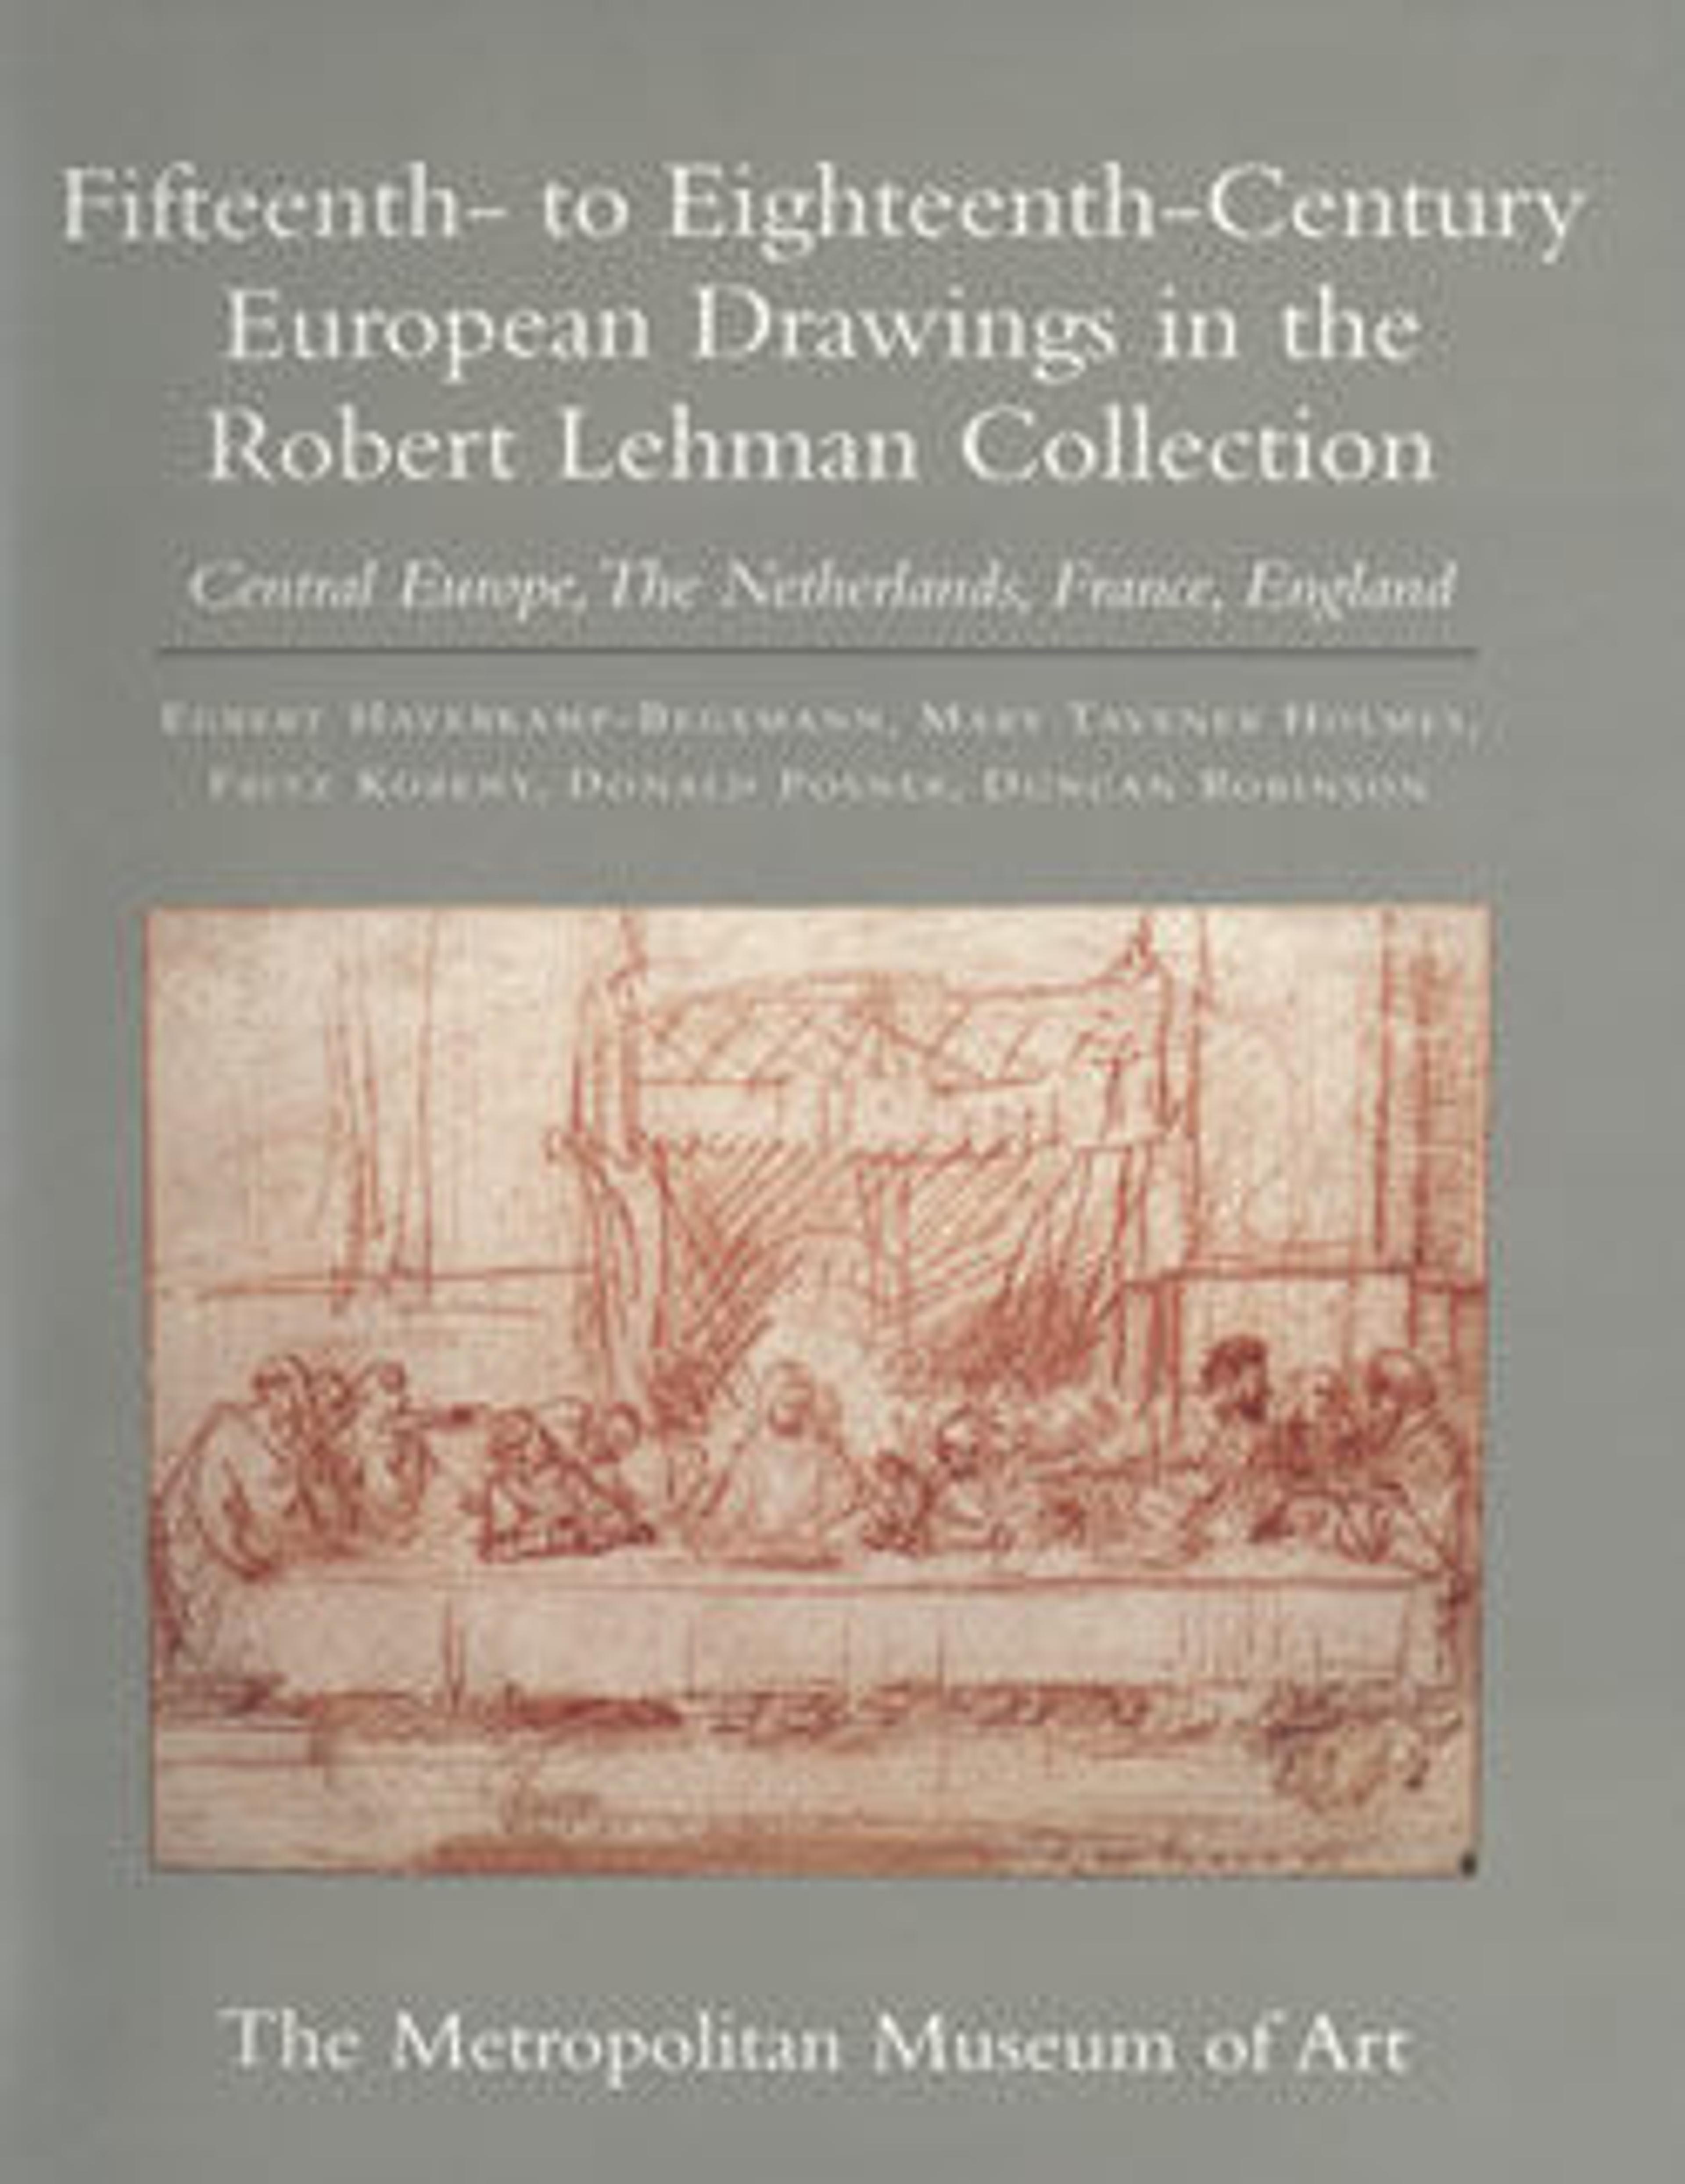 Fifteenth- to Eighteenth-Century European Drawings in the Robert Lehman Collection: Central Europe, the Netherlands, France, England